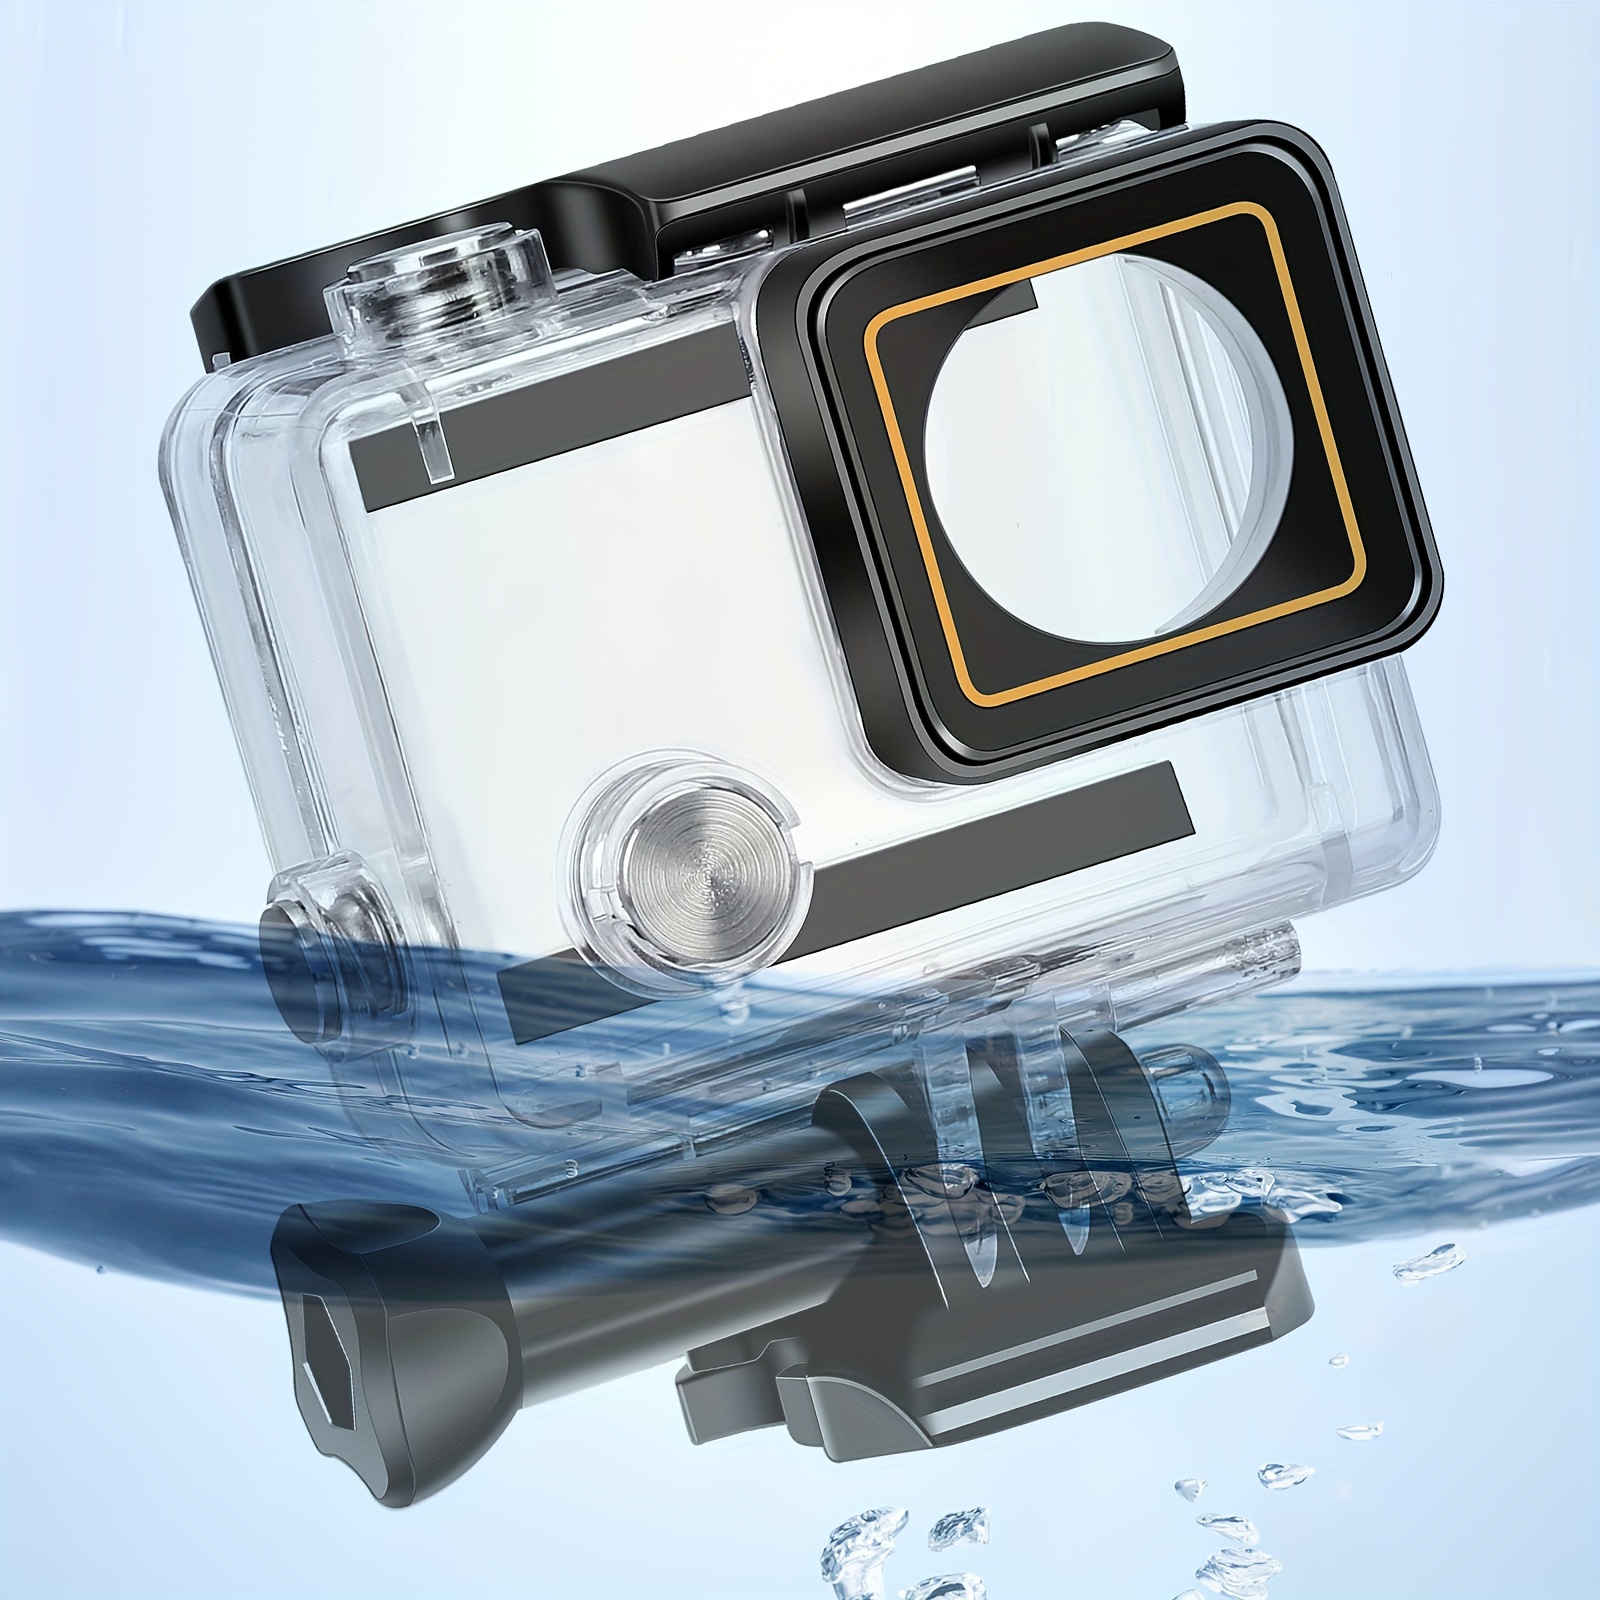 Waterproof Housing Case for Gopro Max Action Camera, Underwater Diving  Protective Shell 30M with Bracket Accessories